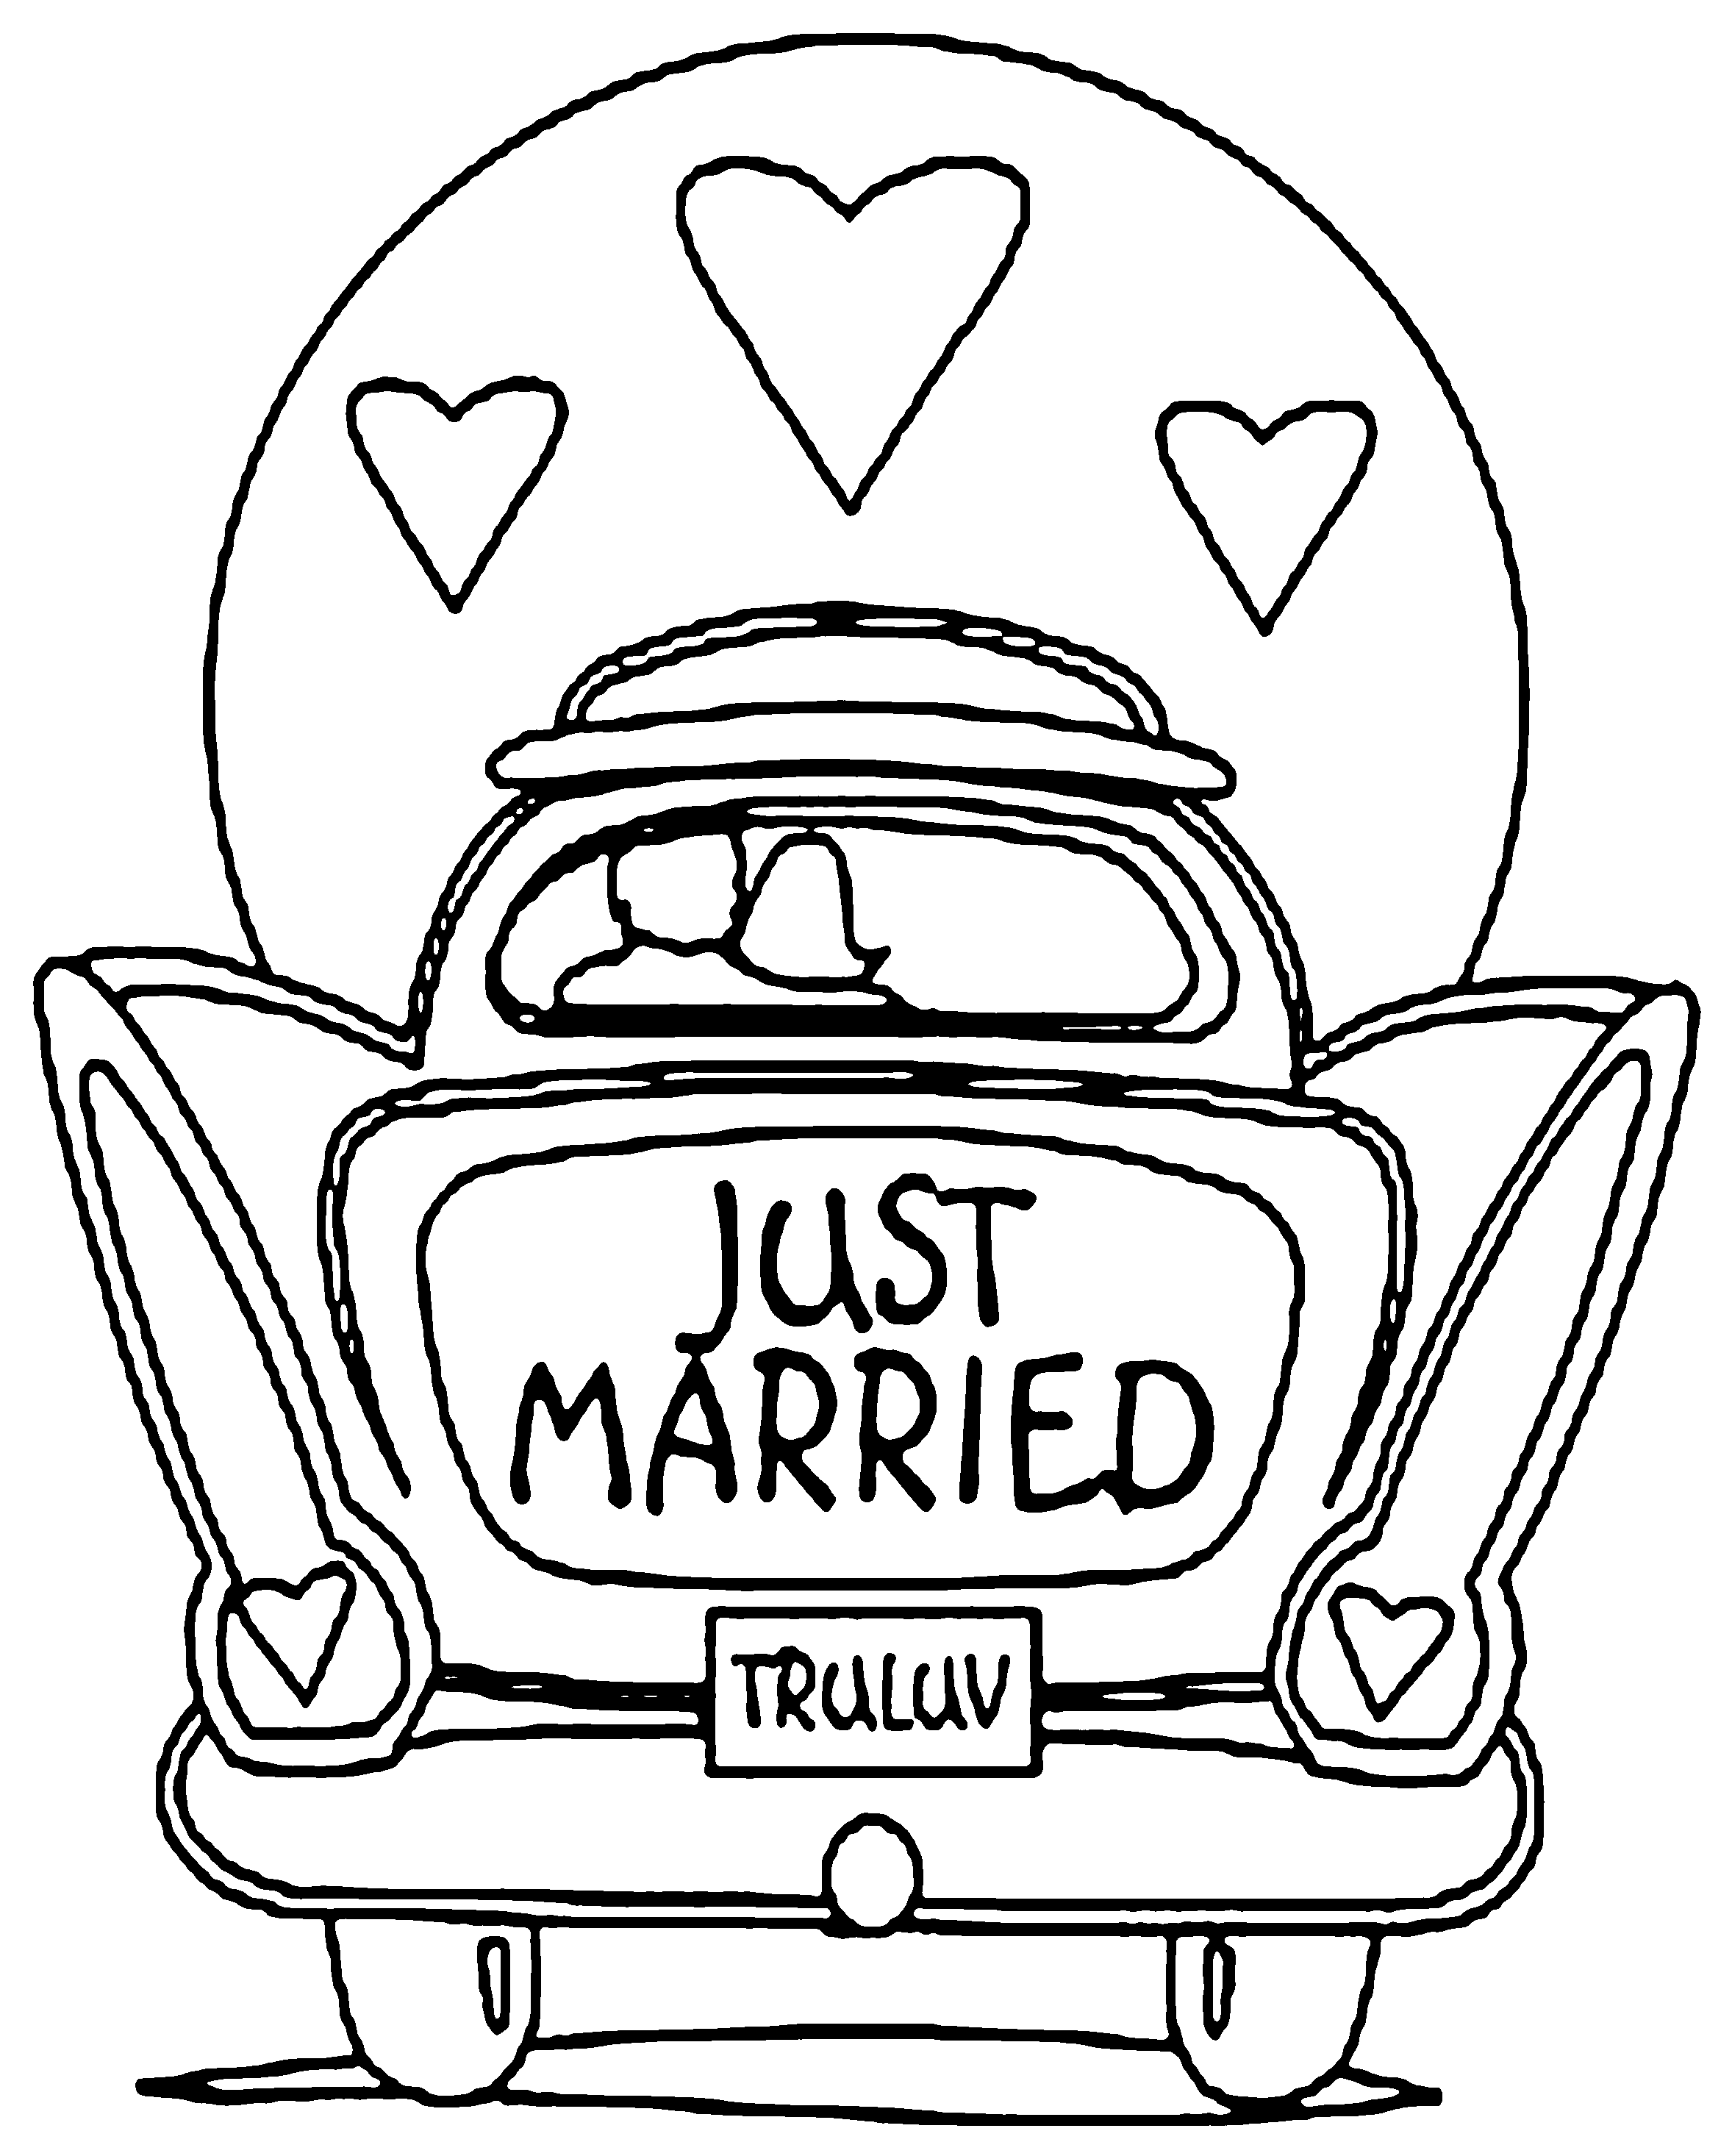 Just-Marriage-Car-coloring-picture